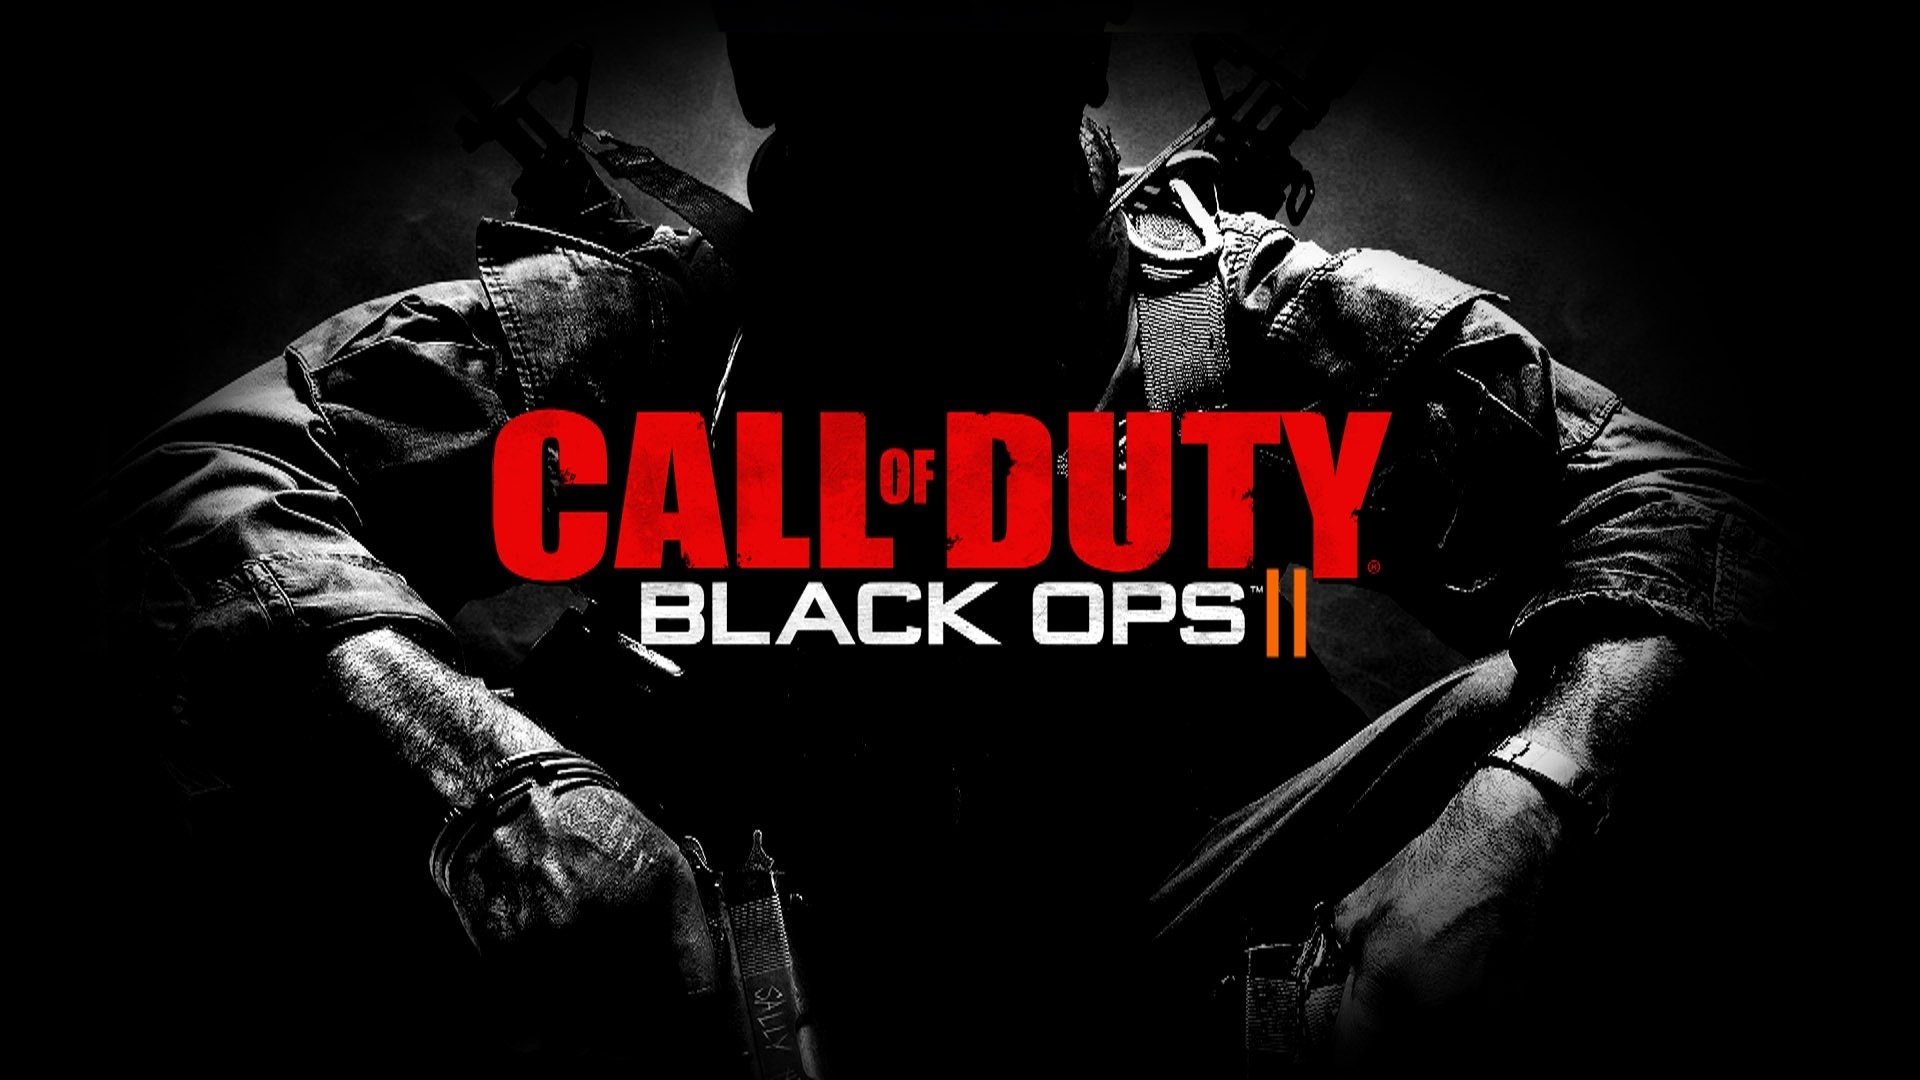 call of duty wallpaper hd,action adventure game,movie,font,pc game,darkness